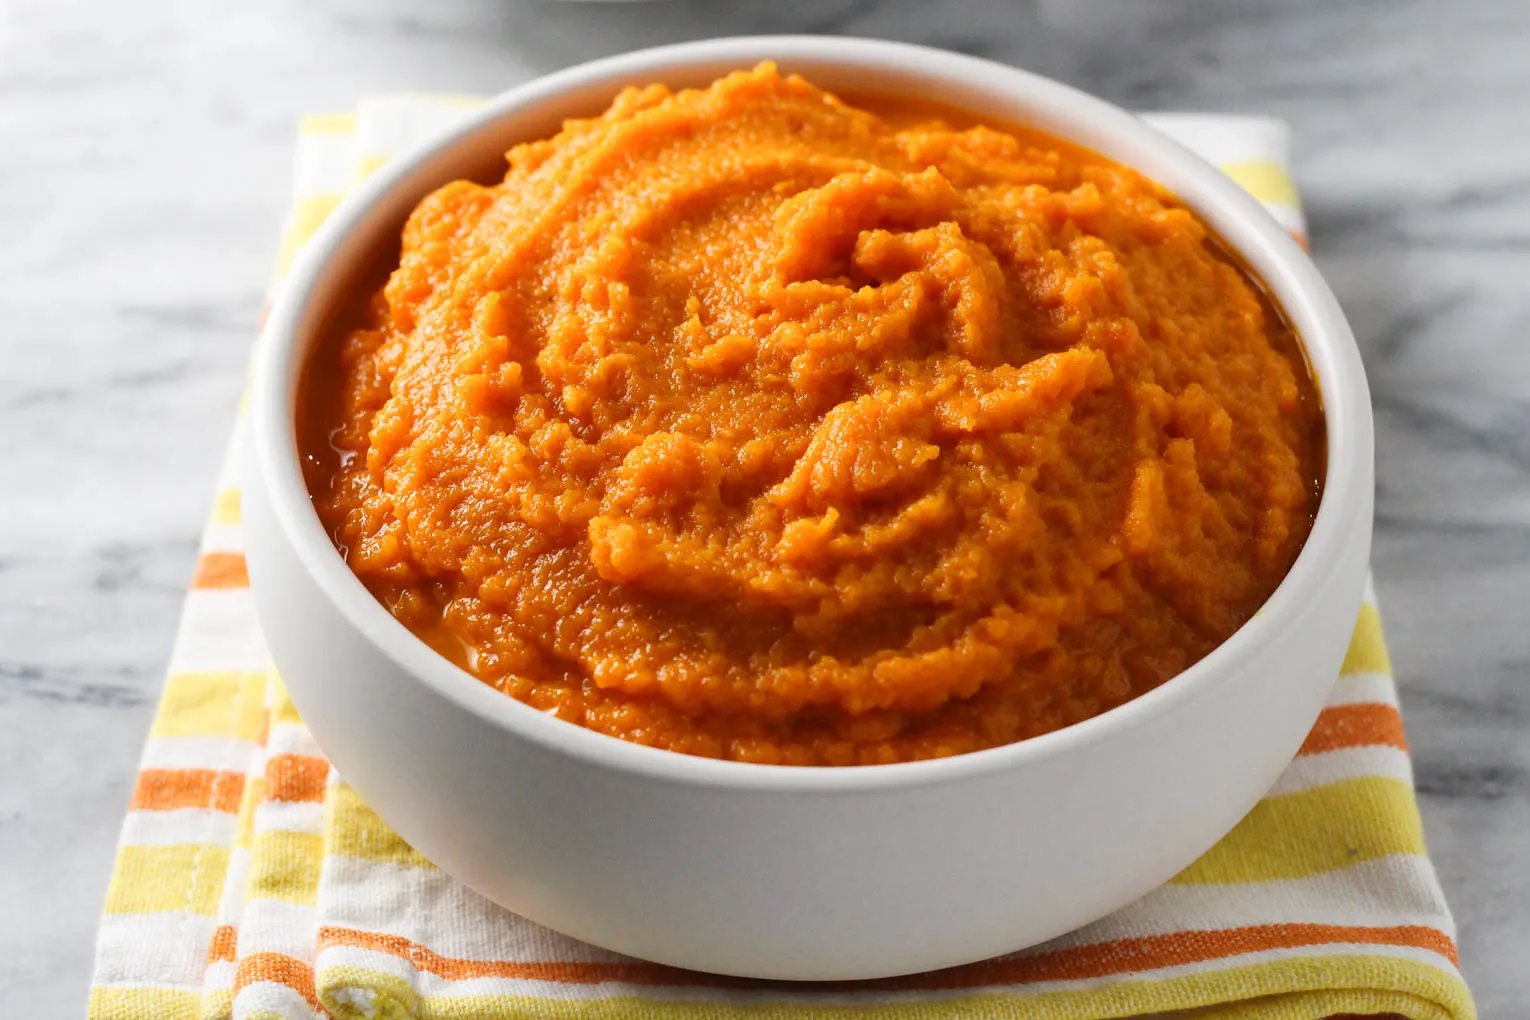 Mashed carrots in a bowl.